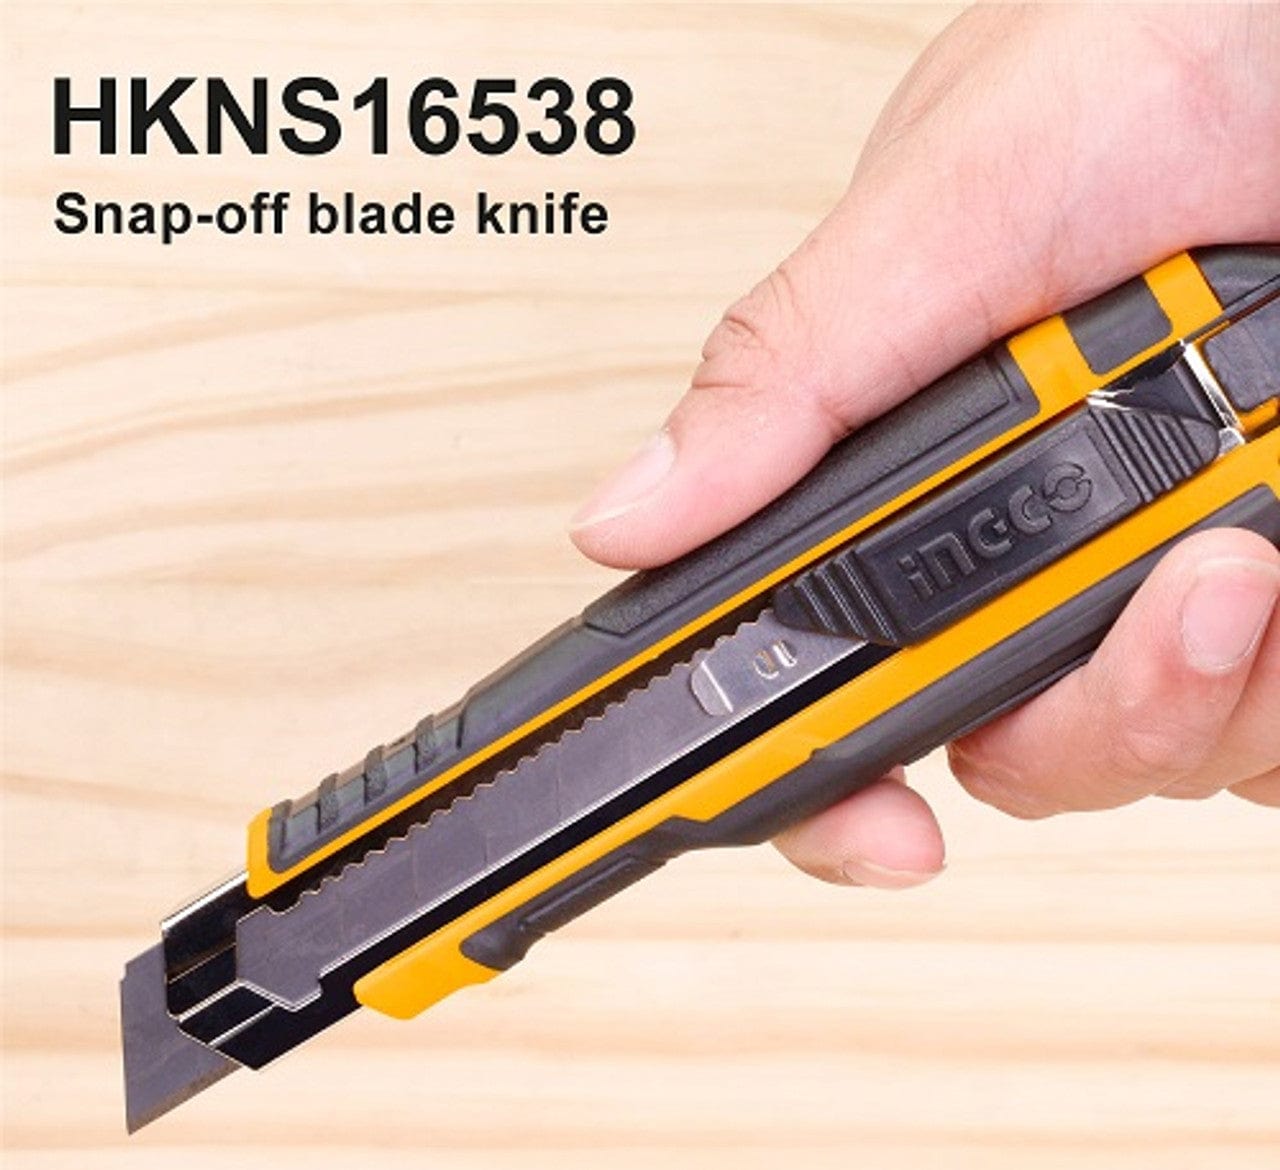 Ingco 169mm Snap-off Blade Knife - HKNS16538 | Supply Master | Accra, Ghana Multi Tools & Knives Buy Tools hardware Building materials